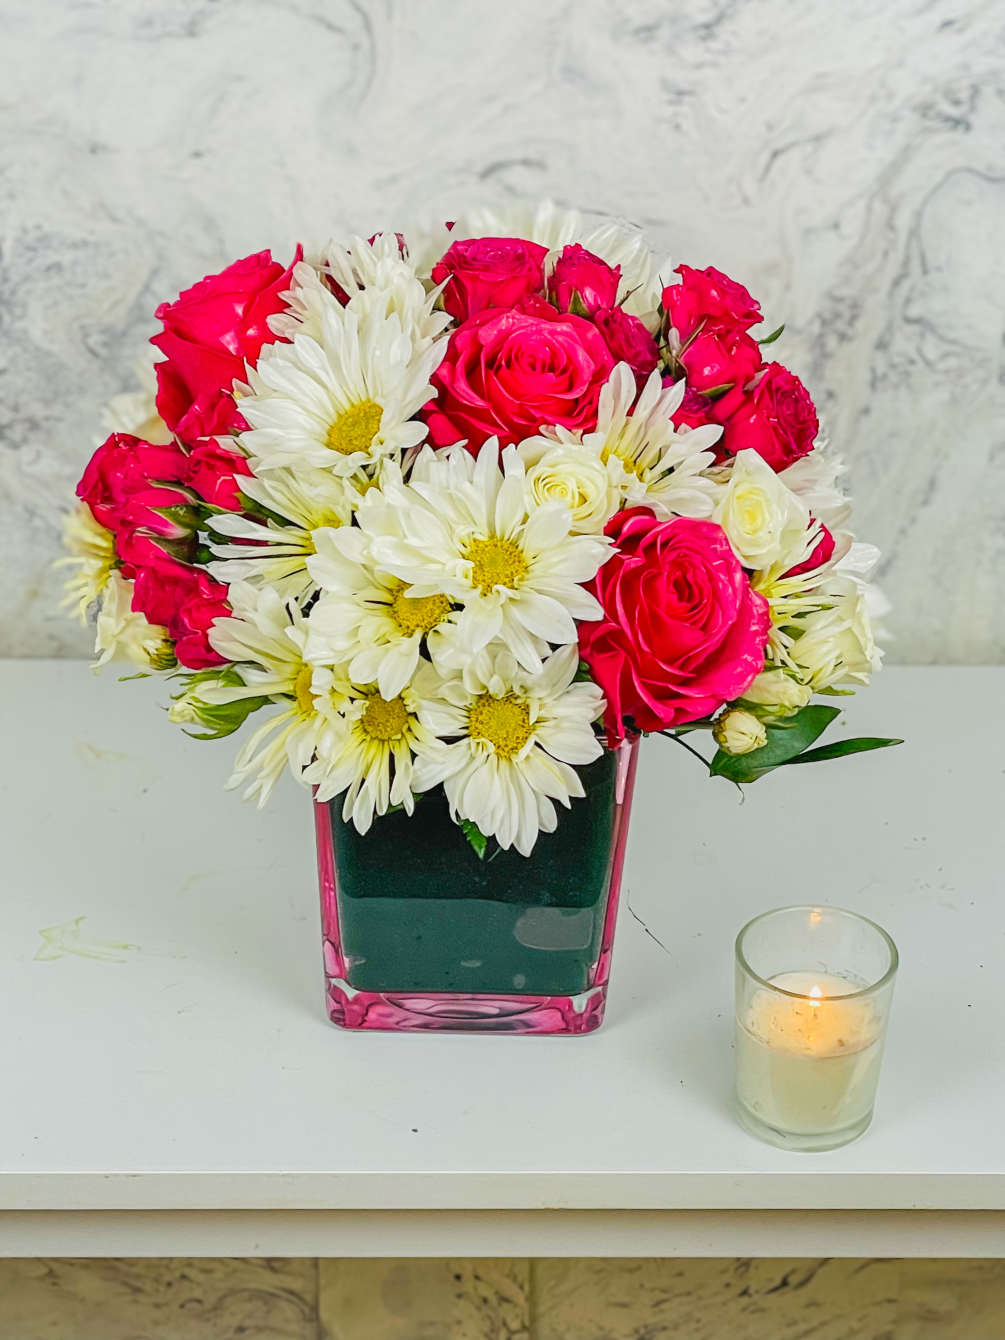 This arrangement contains spray daisies and spray roses. This is a great